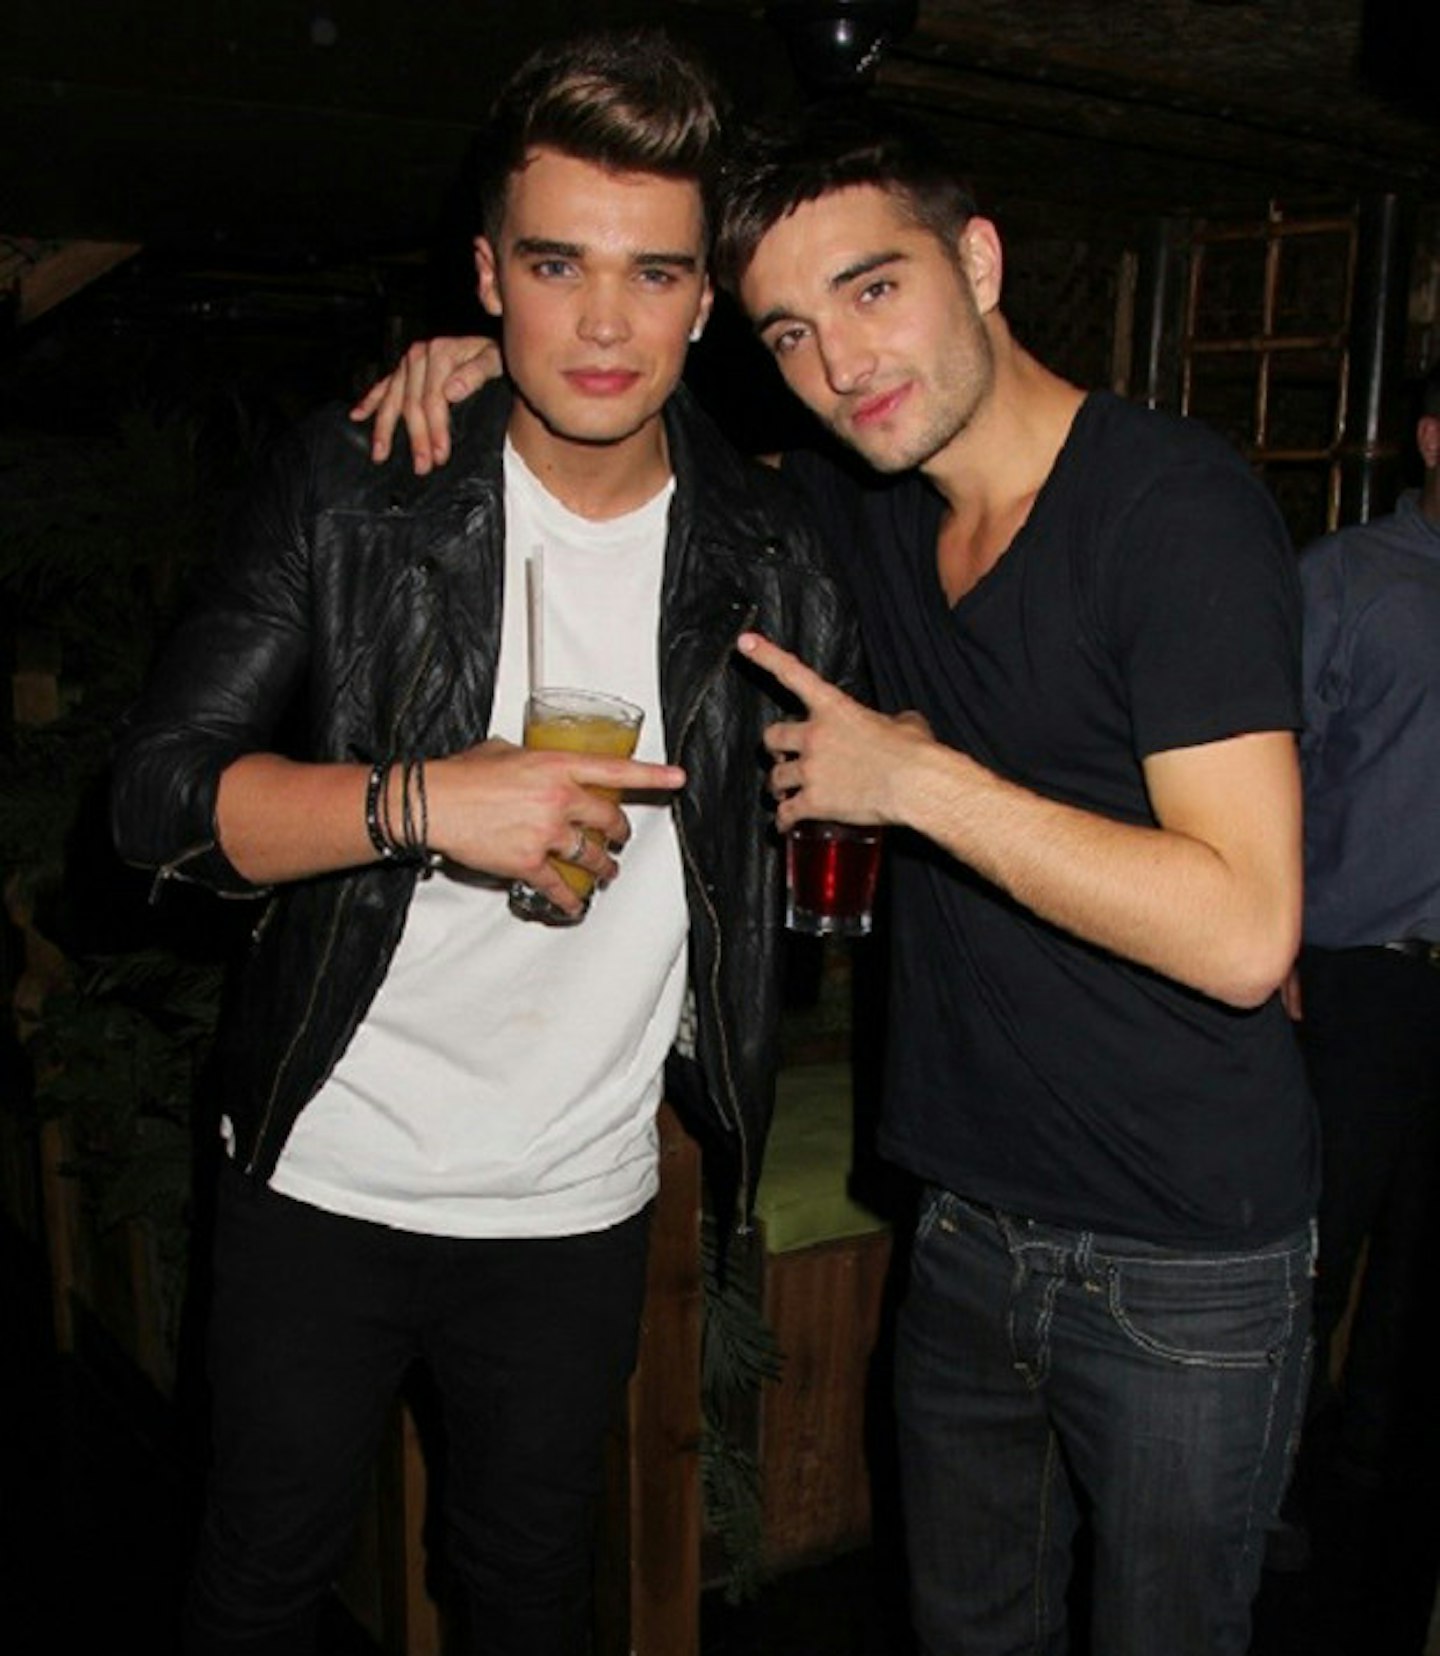 Josh from Union J and Tom from The Wanted